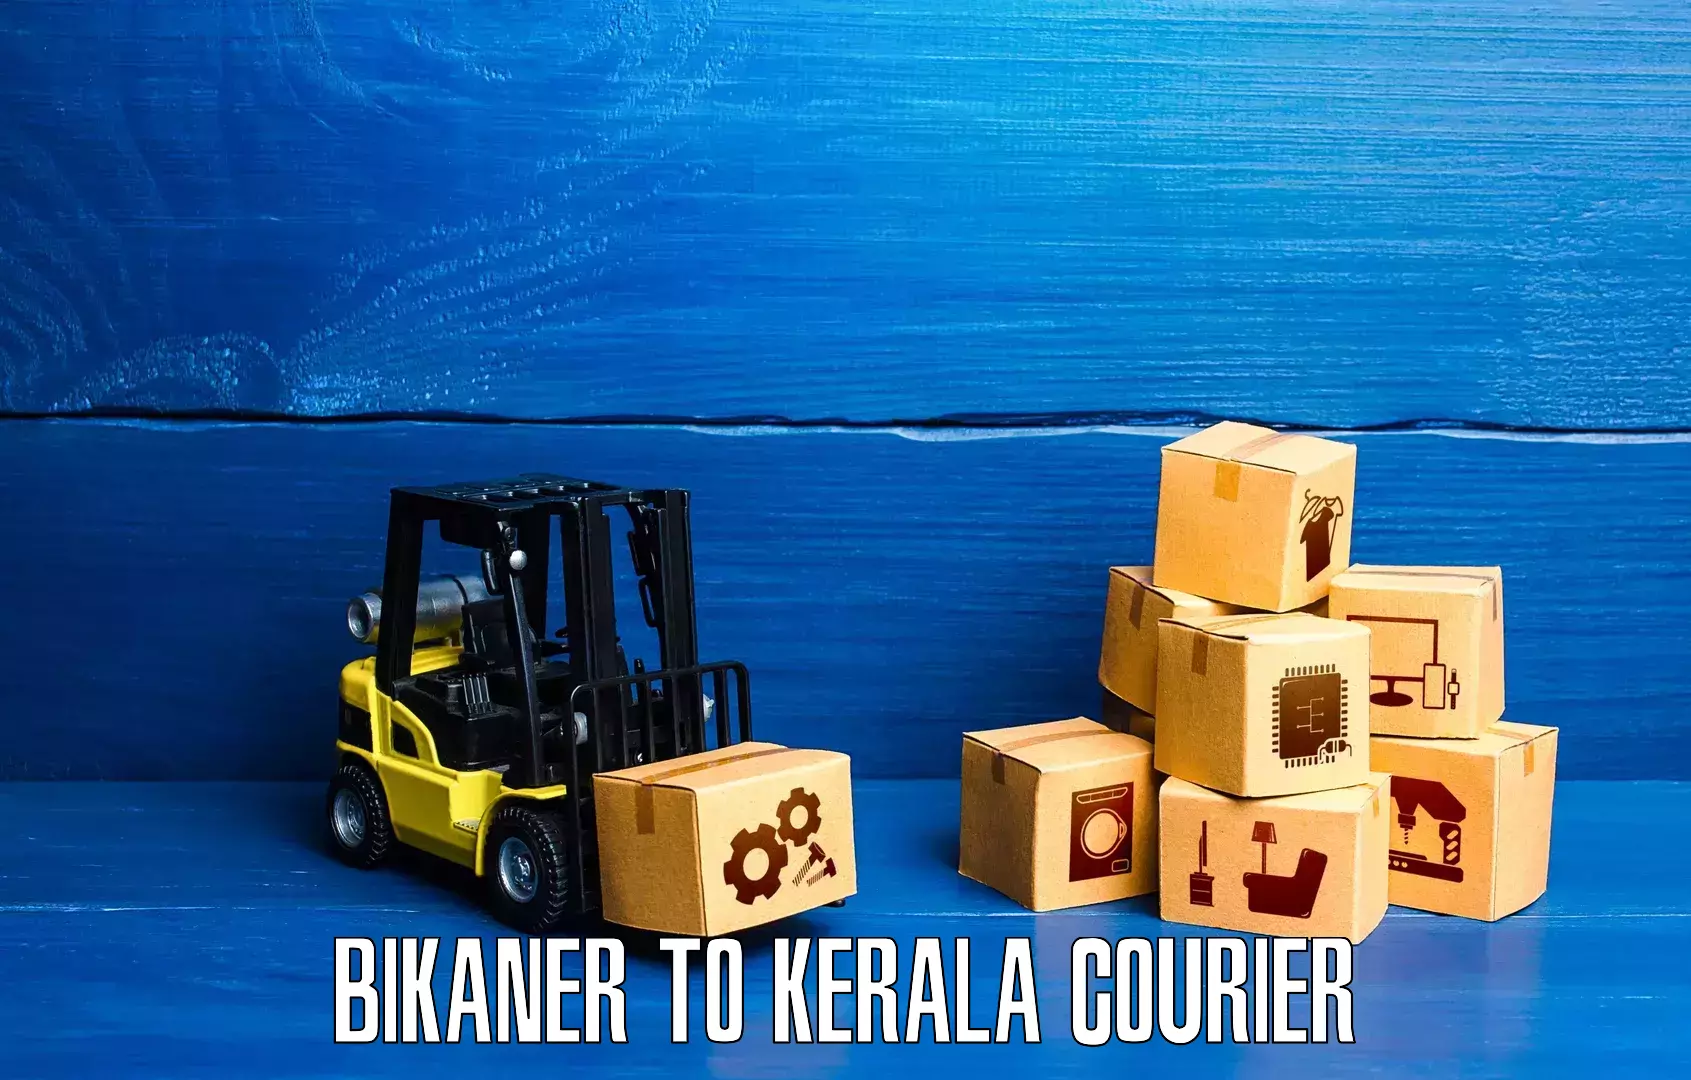 Sustainable delivery practices Bikaner to Kerala